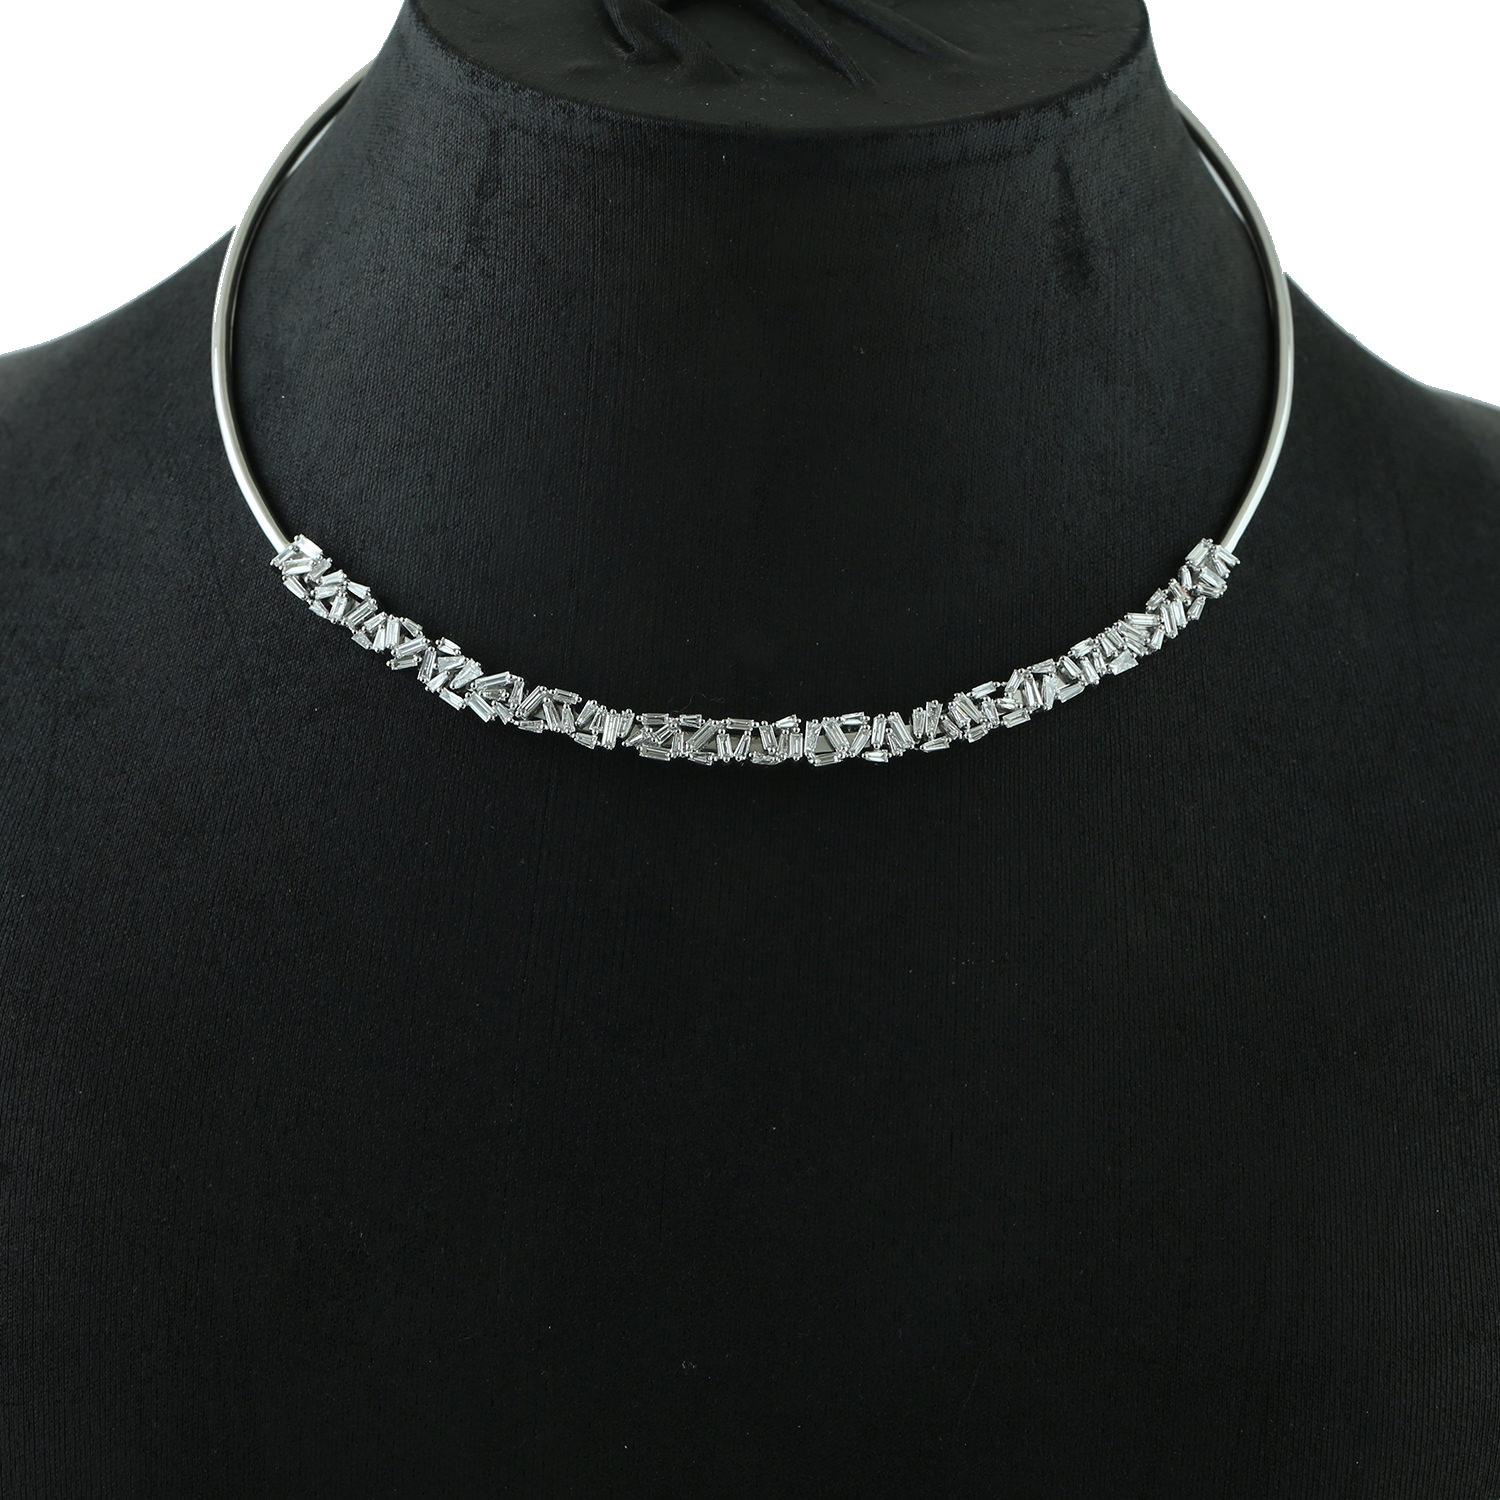 Cast in 14 karat gold, this stunning choker necklace is hand set in 3.48 carats baguette cut diamonds. Also available in yellow and white gold.

FOLLOW  MEGHNA JEWELS storefront to view the latest collection & exclusive pieces.  Meghna Jewels is